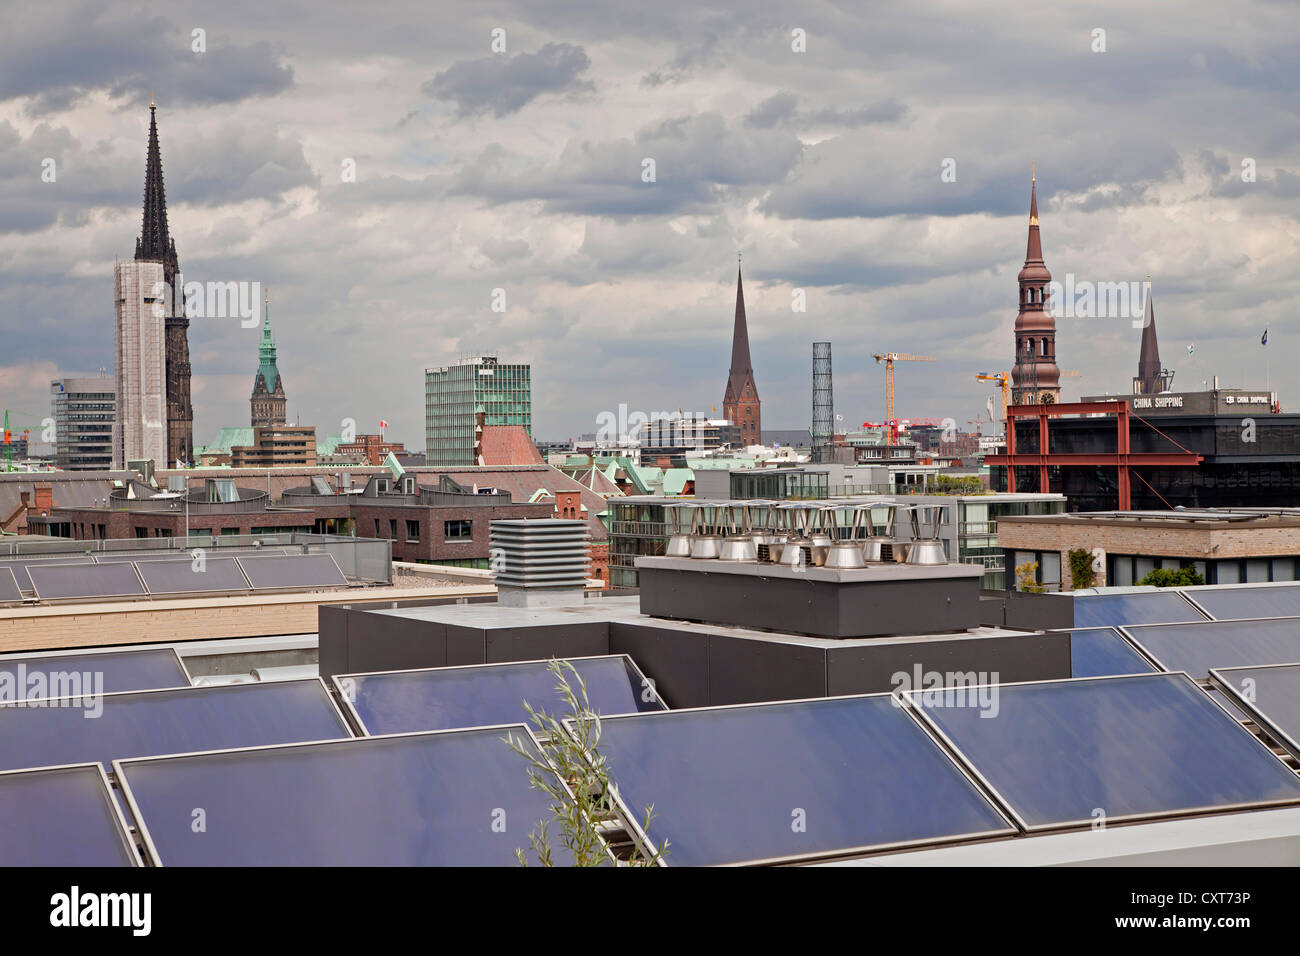 City view with a solar plant on a roof, Free and Hanseatic City of Hamburg, Germany, Europe Stock Photo